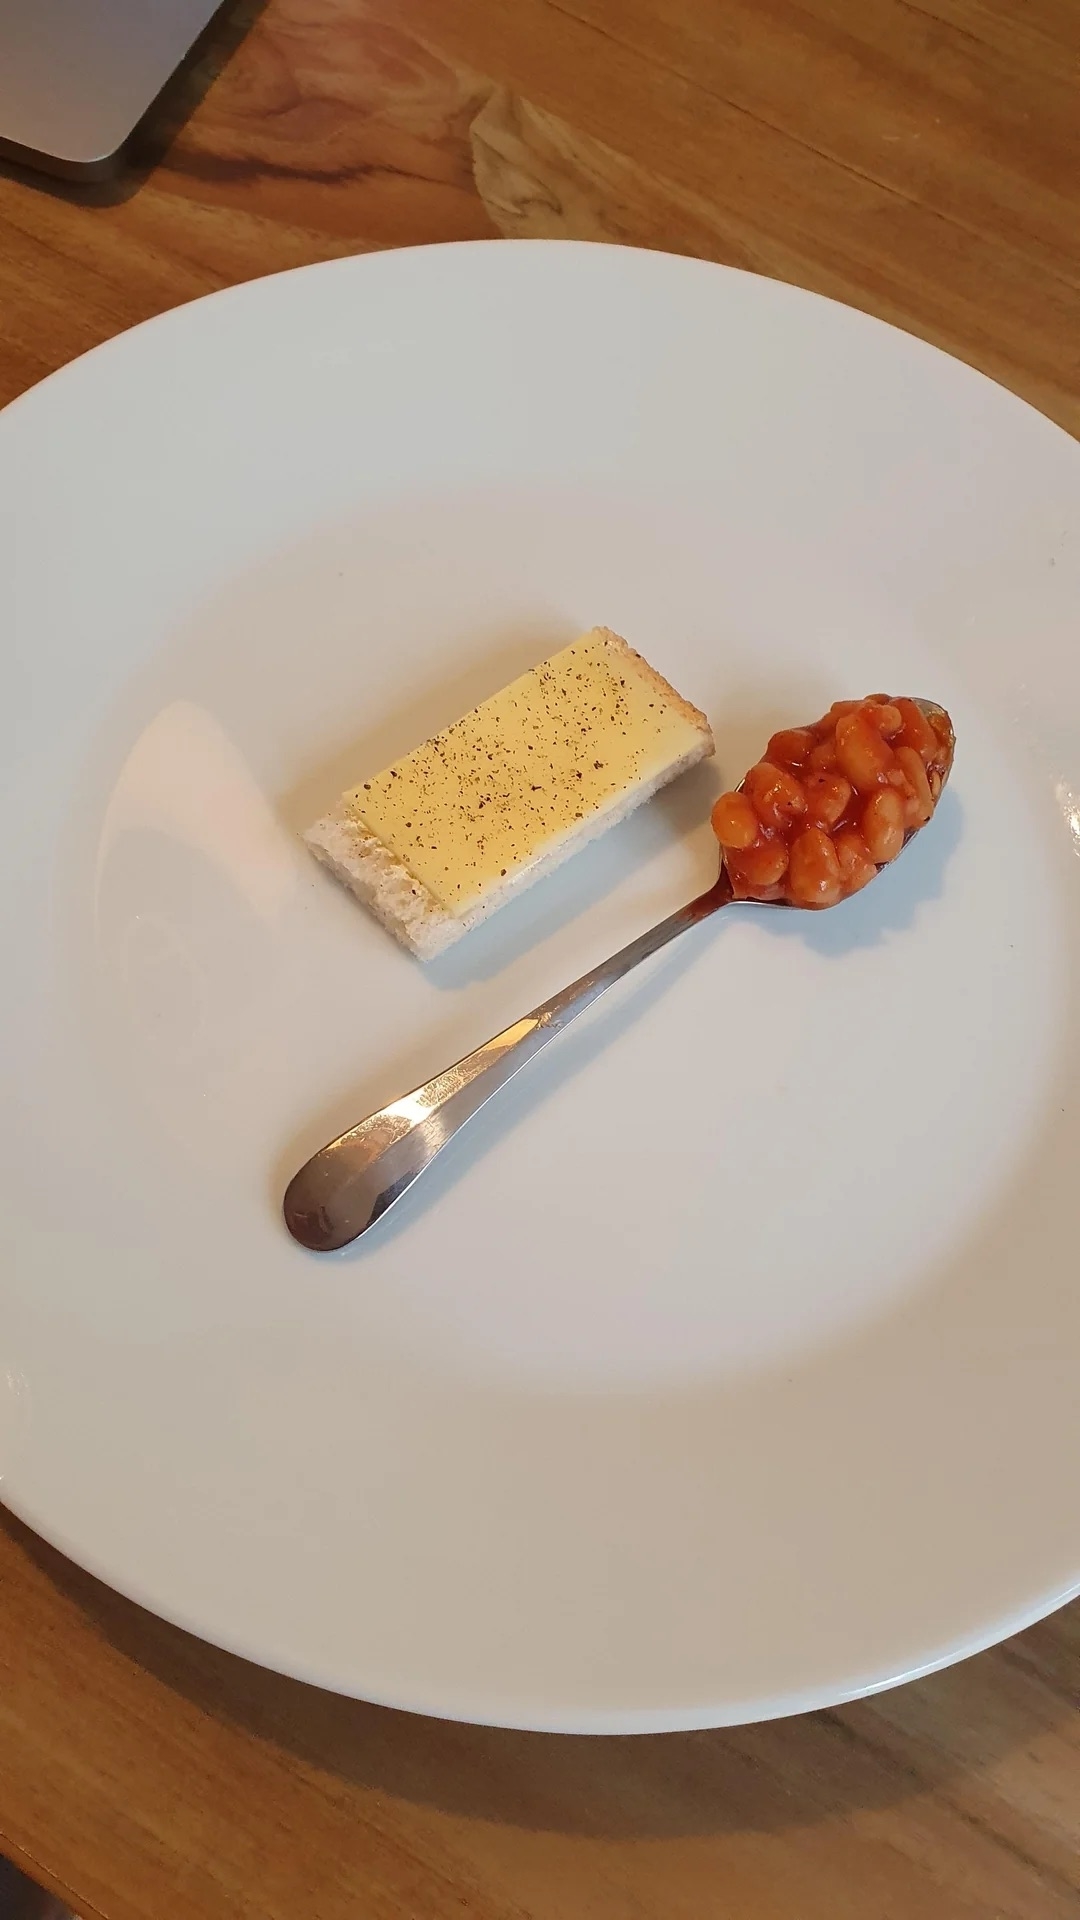 A plate with a cracker topped with cheese beside a spoonful of baked beans